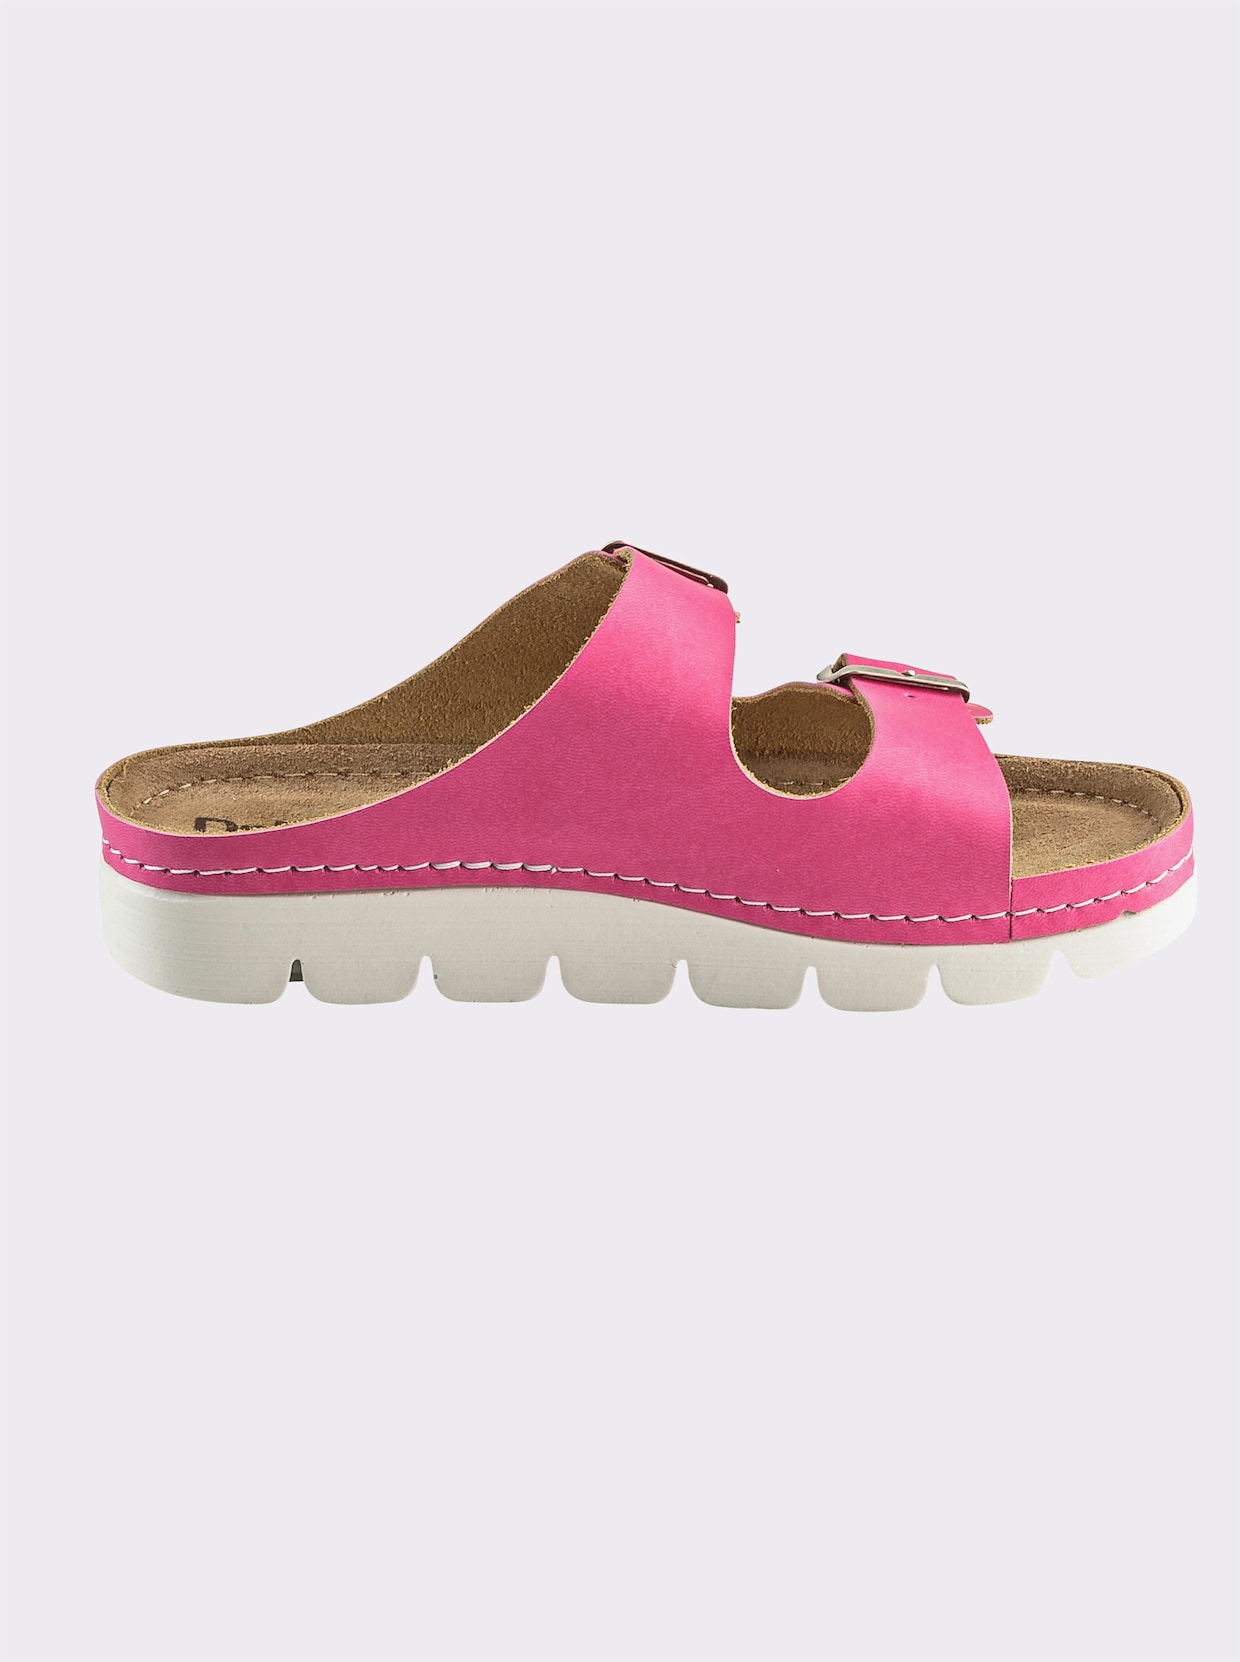 Dr. Feet slippers - pink